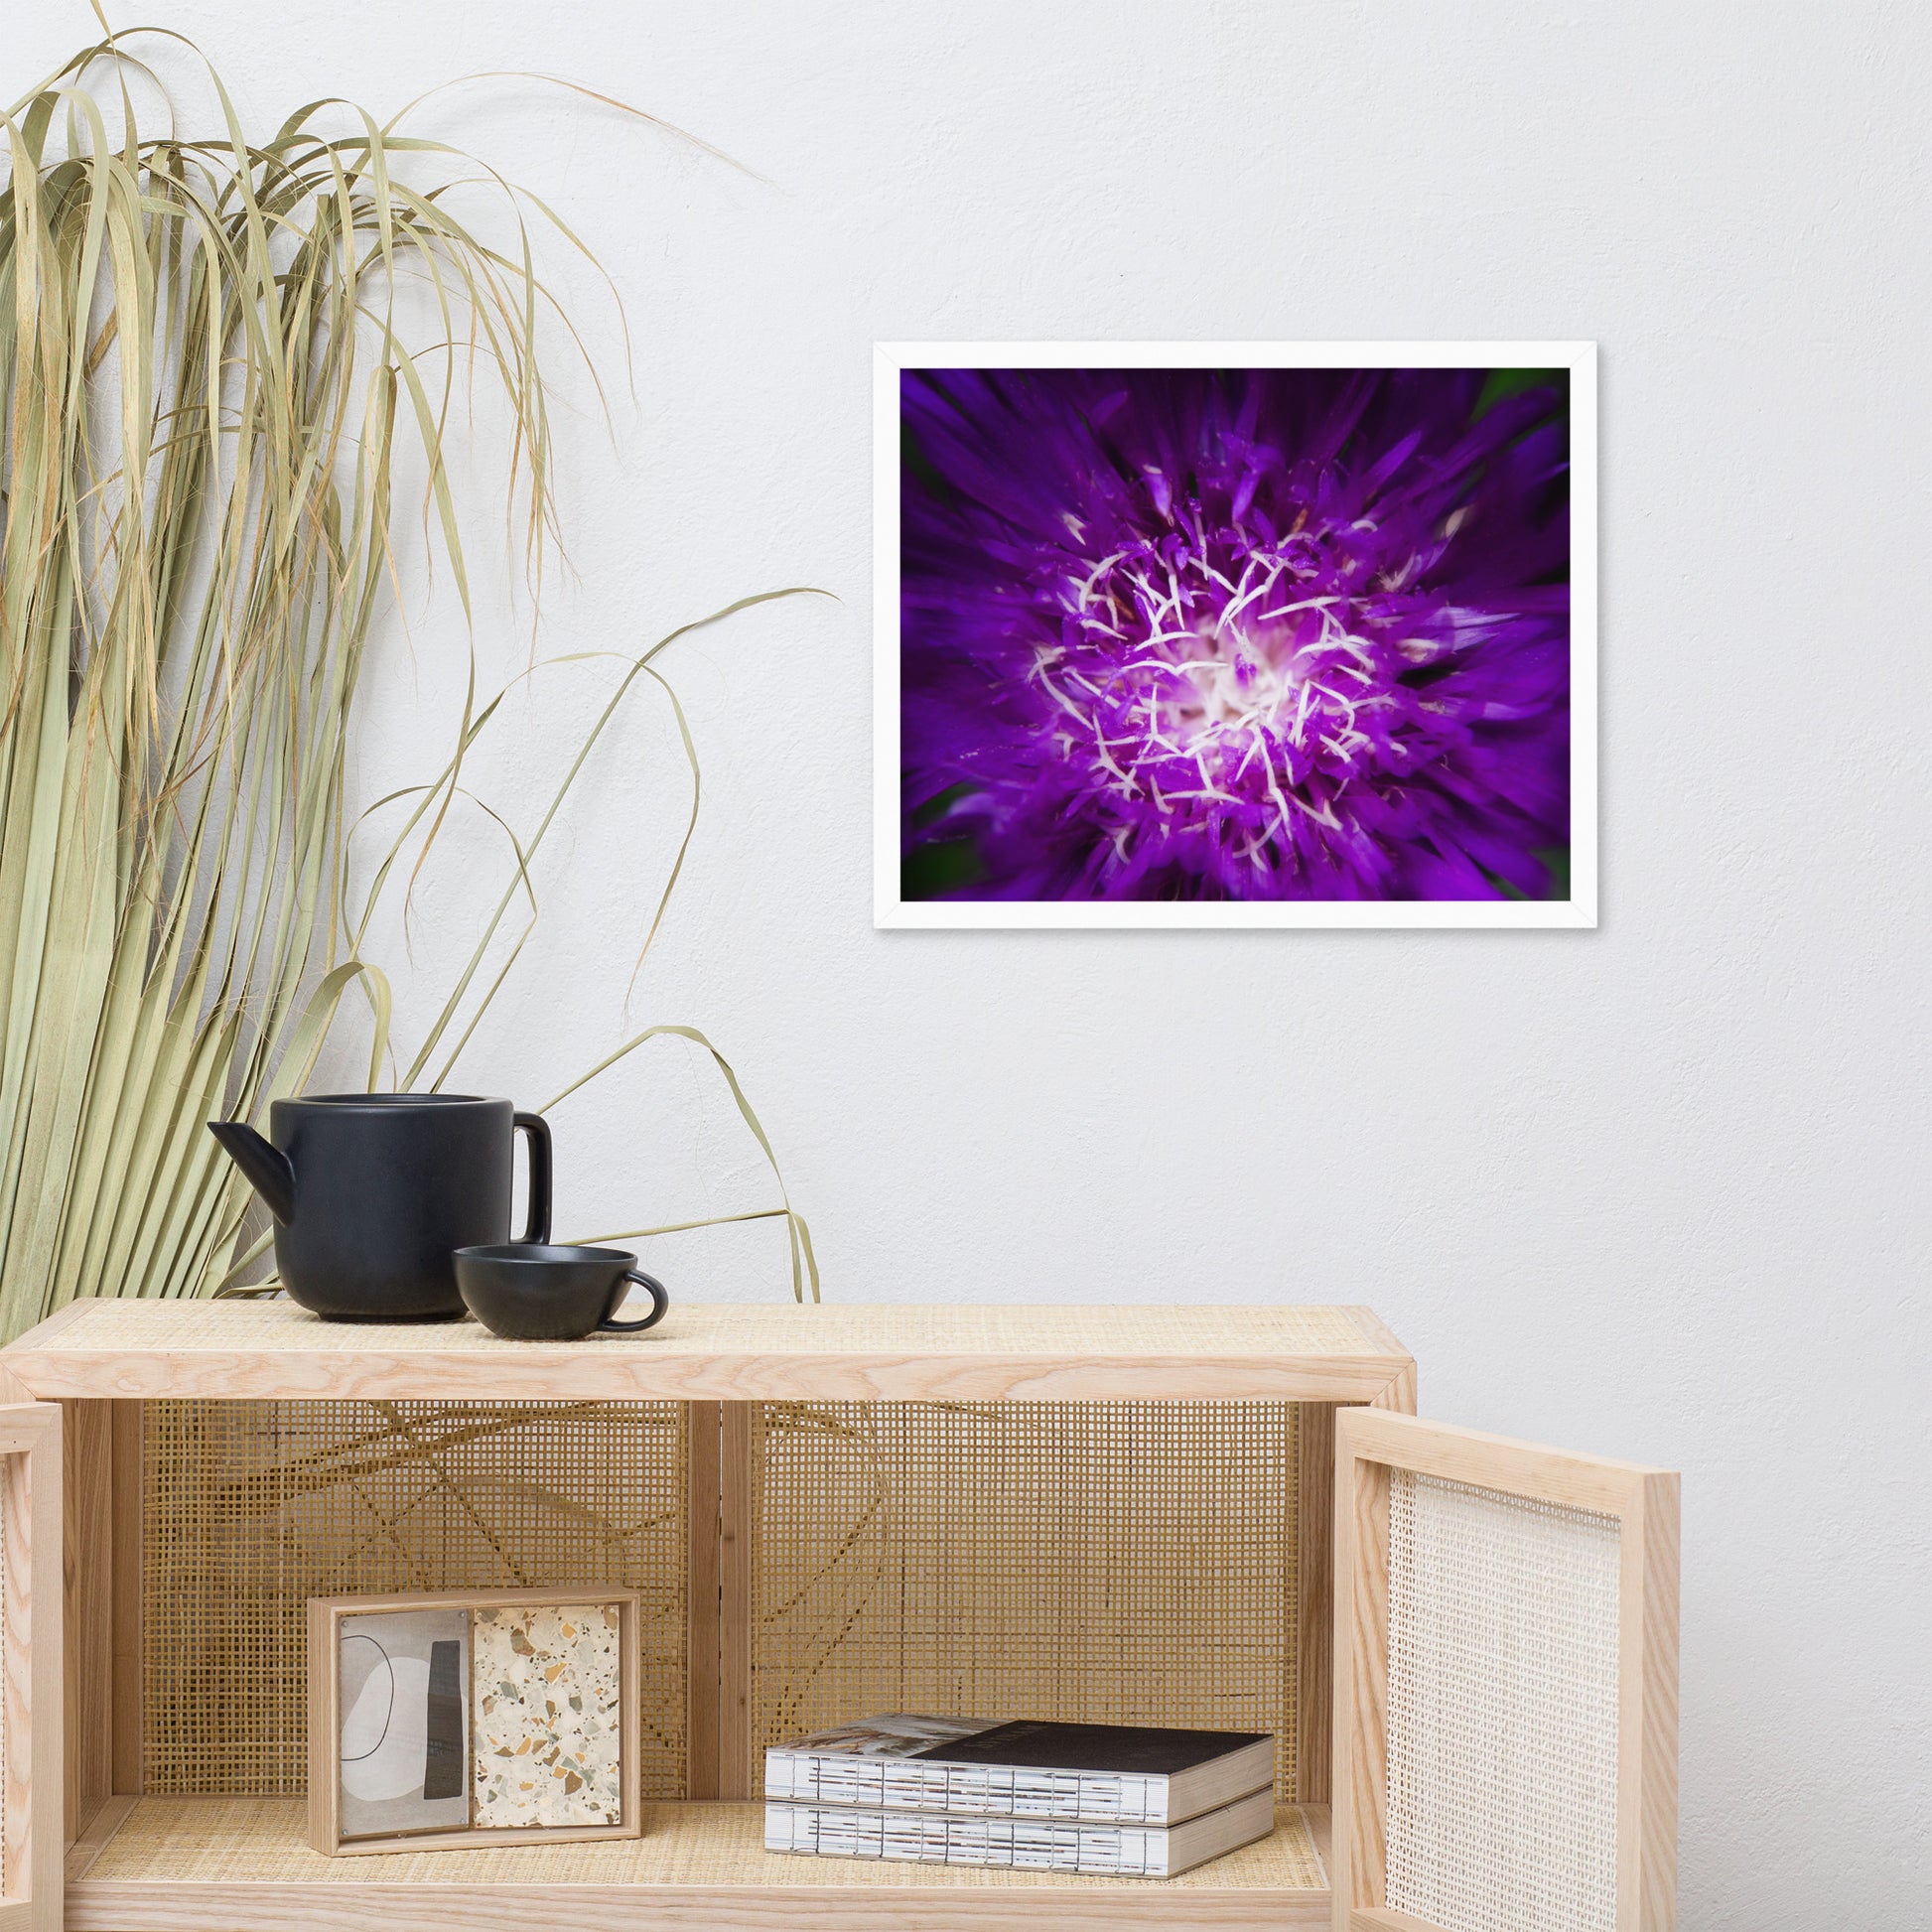 Contemporary Prints For Living Room: Purple Abstract Flower - Botanical / Floral / Flora / Flowers / Nature Photograph Framed Wall Art Print - Artwork - Wall Decor